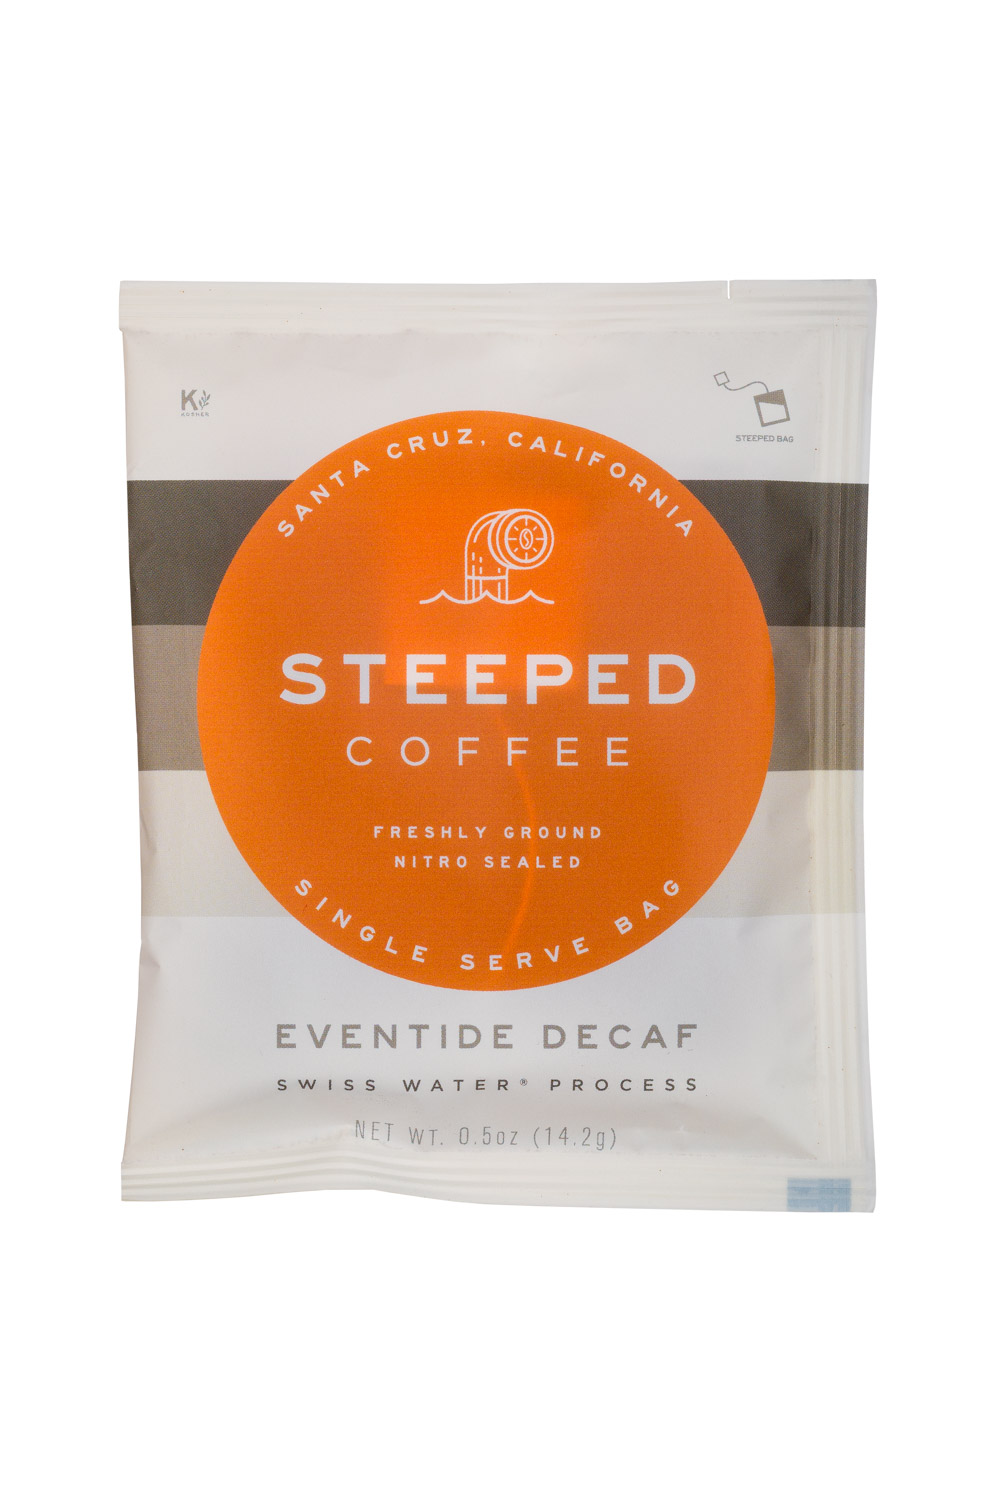 Eventide Decaf - Swiss Water Process